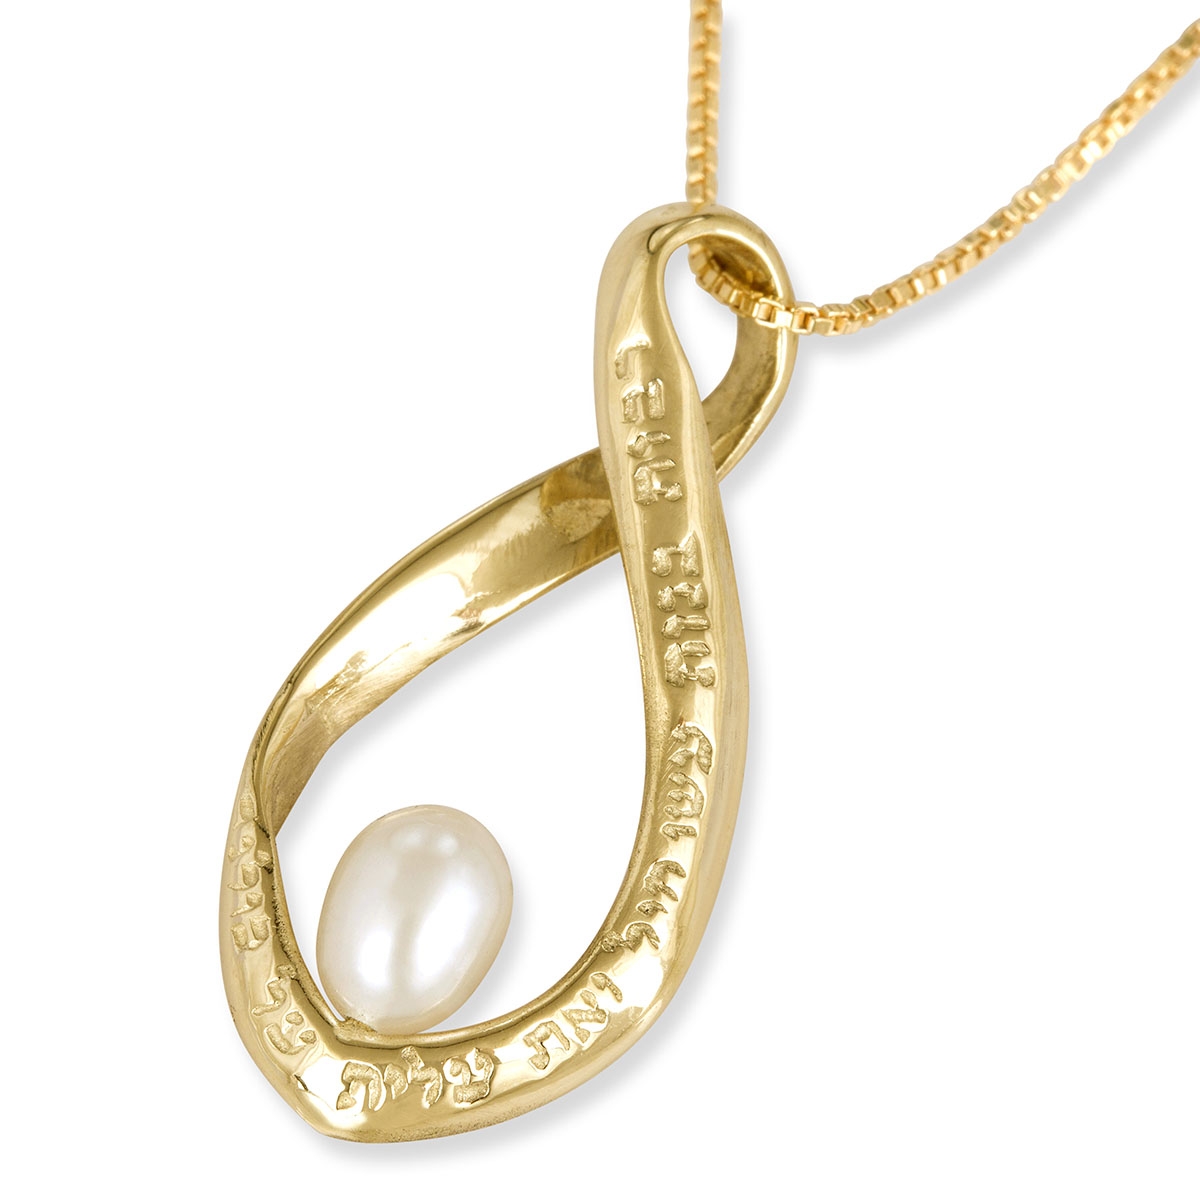 9K Gold Eternity Twist with Pearl - Woman of Valor - Proverbs 31:29 - 1